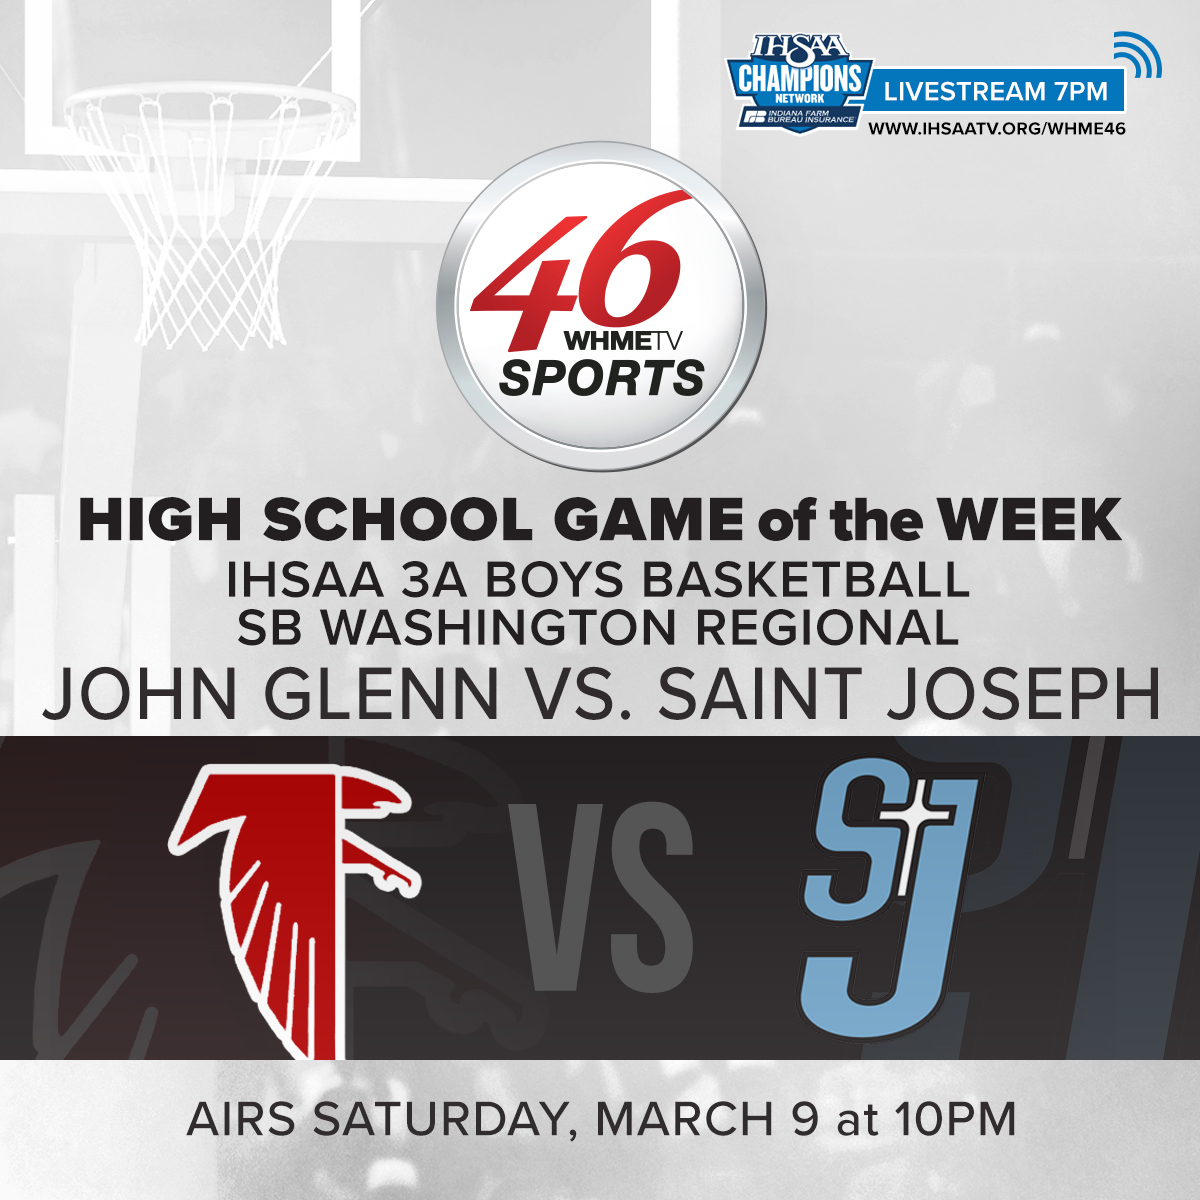 We'll have a @NIC_athletics matchup in the regional Saturday night when @JohnGlennHoops faces @SJhoopsquad on 46!